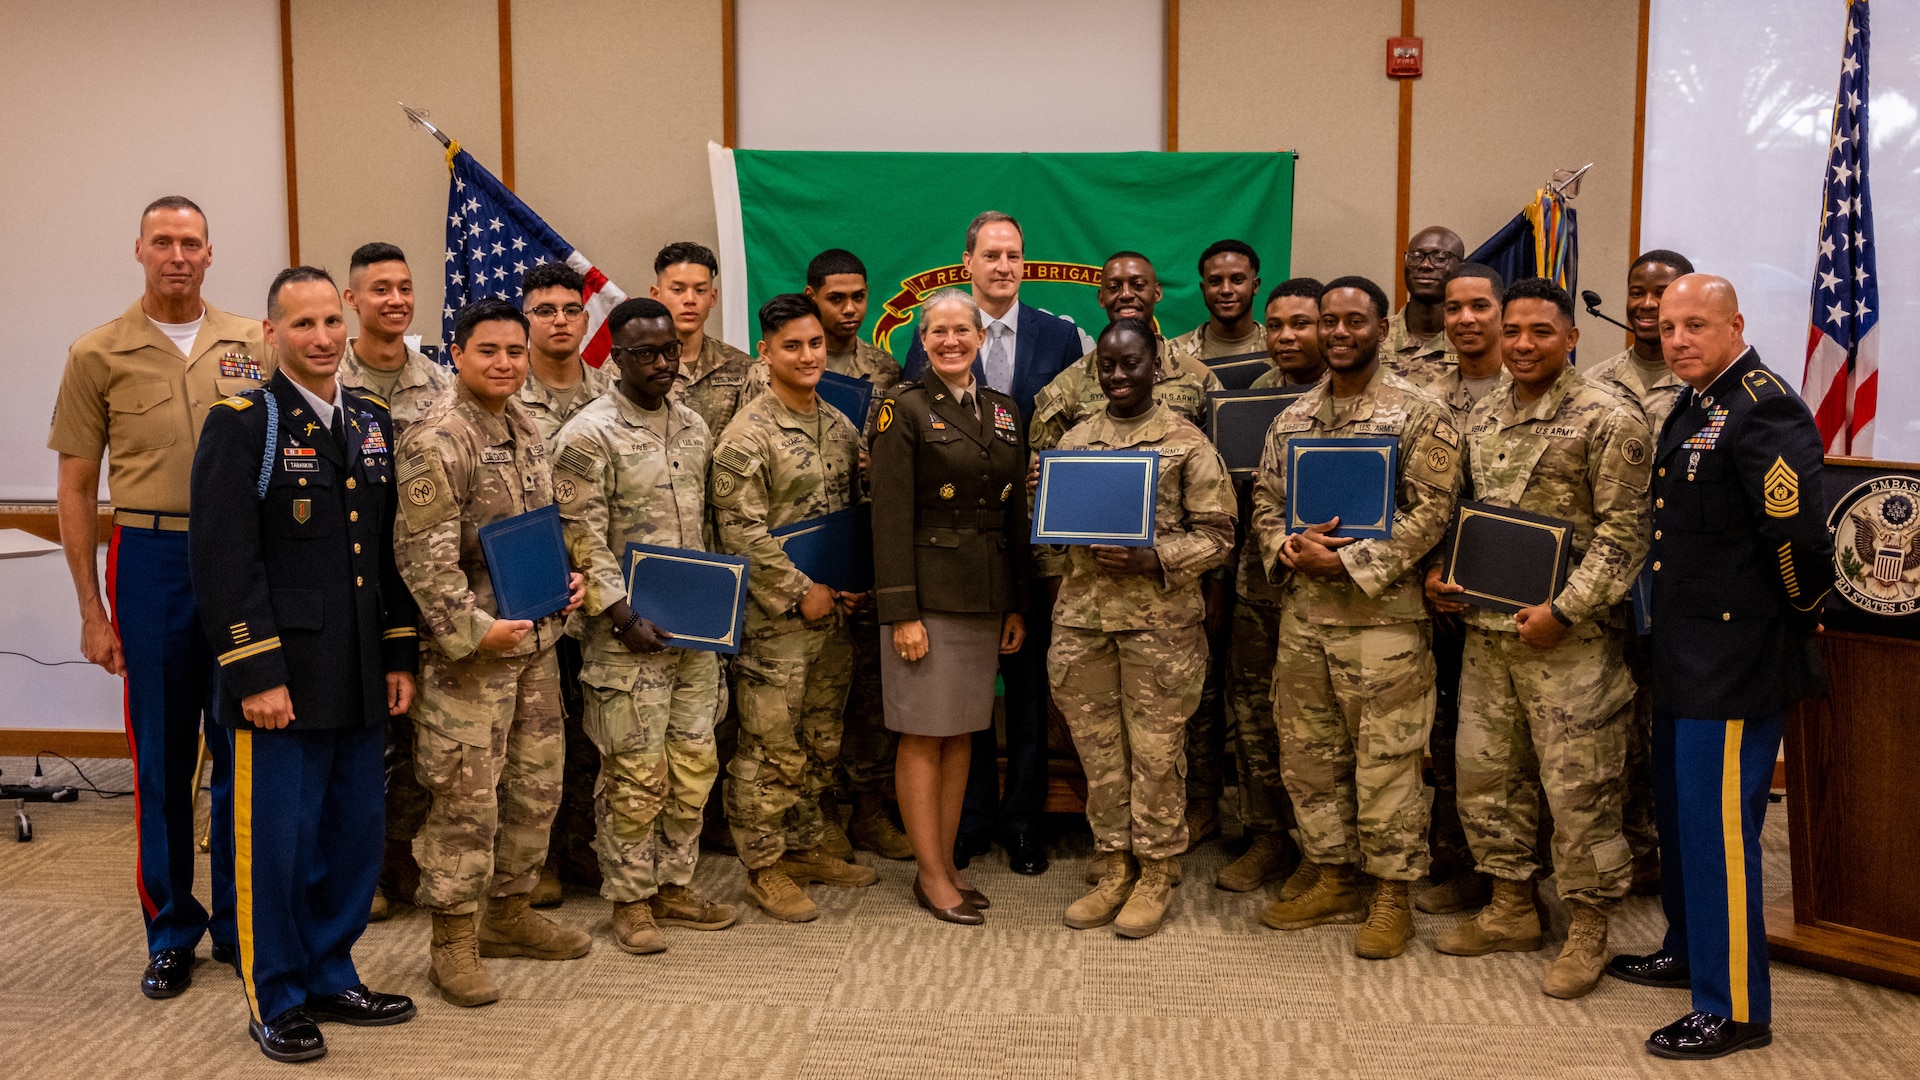 Fifteen New York Army National Guard Soldiers assigned to Combined Joint Task Force - Horn of Africa became U.S. citizens during a naturalization ceremony at the U.S. Embassy in Djibouti City, Djibouti, Mar. 10, 2023. The Soldiers, all belonging to the 27th Infantry Brigade Combat Team, are on a 9-month deployment.